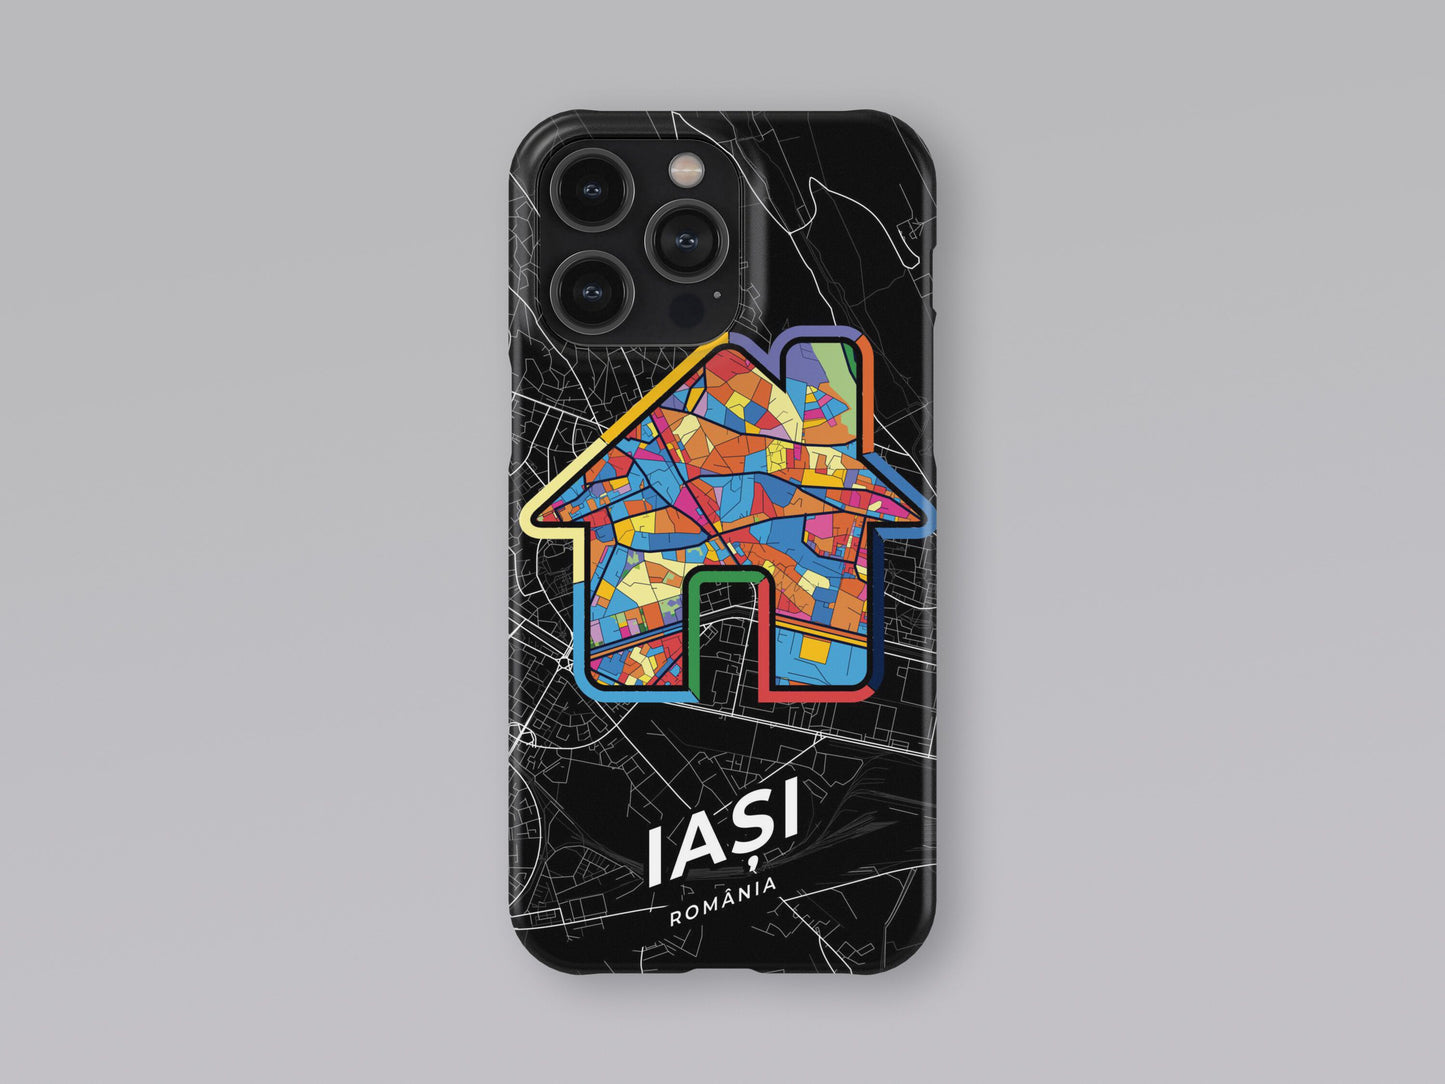 Iași Romania slim phone case with colorful icon. Birthday, wedding or housewarming gift. Couple match cases. 3